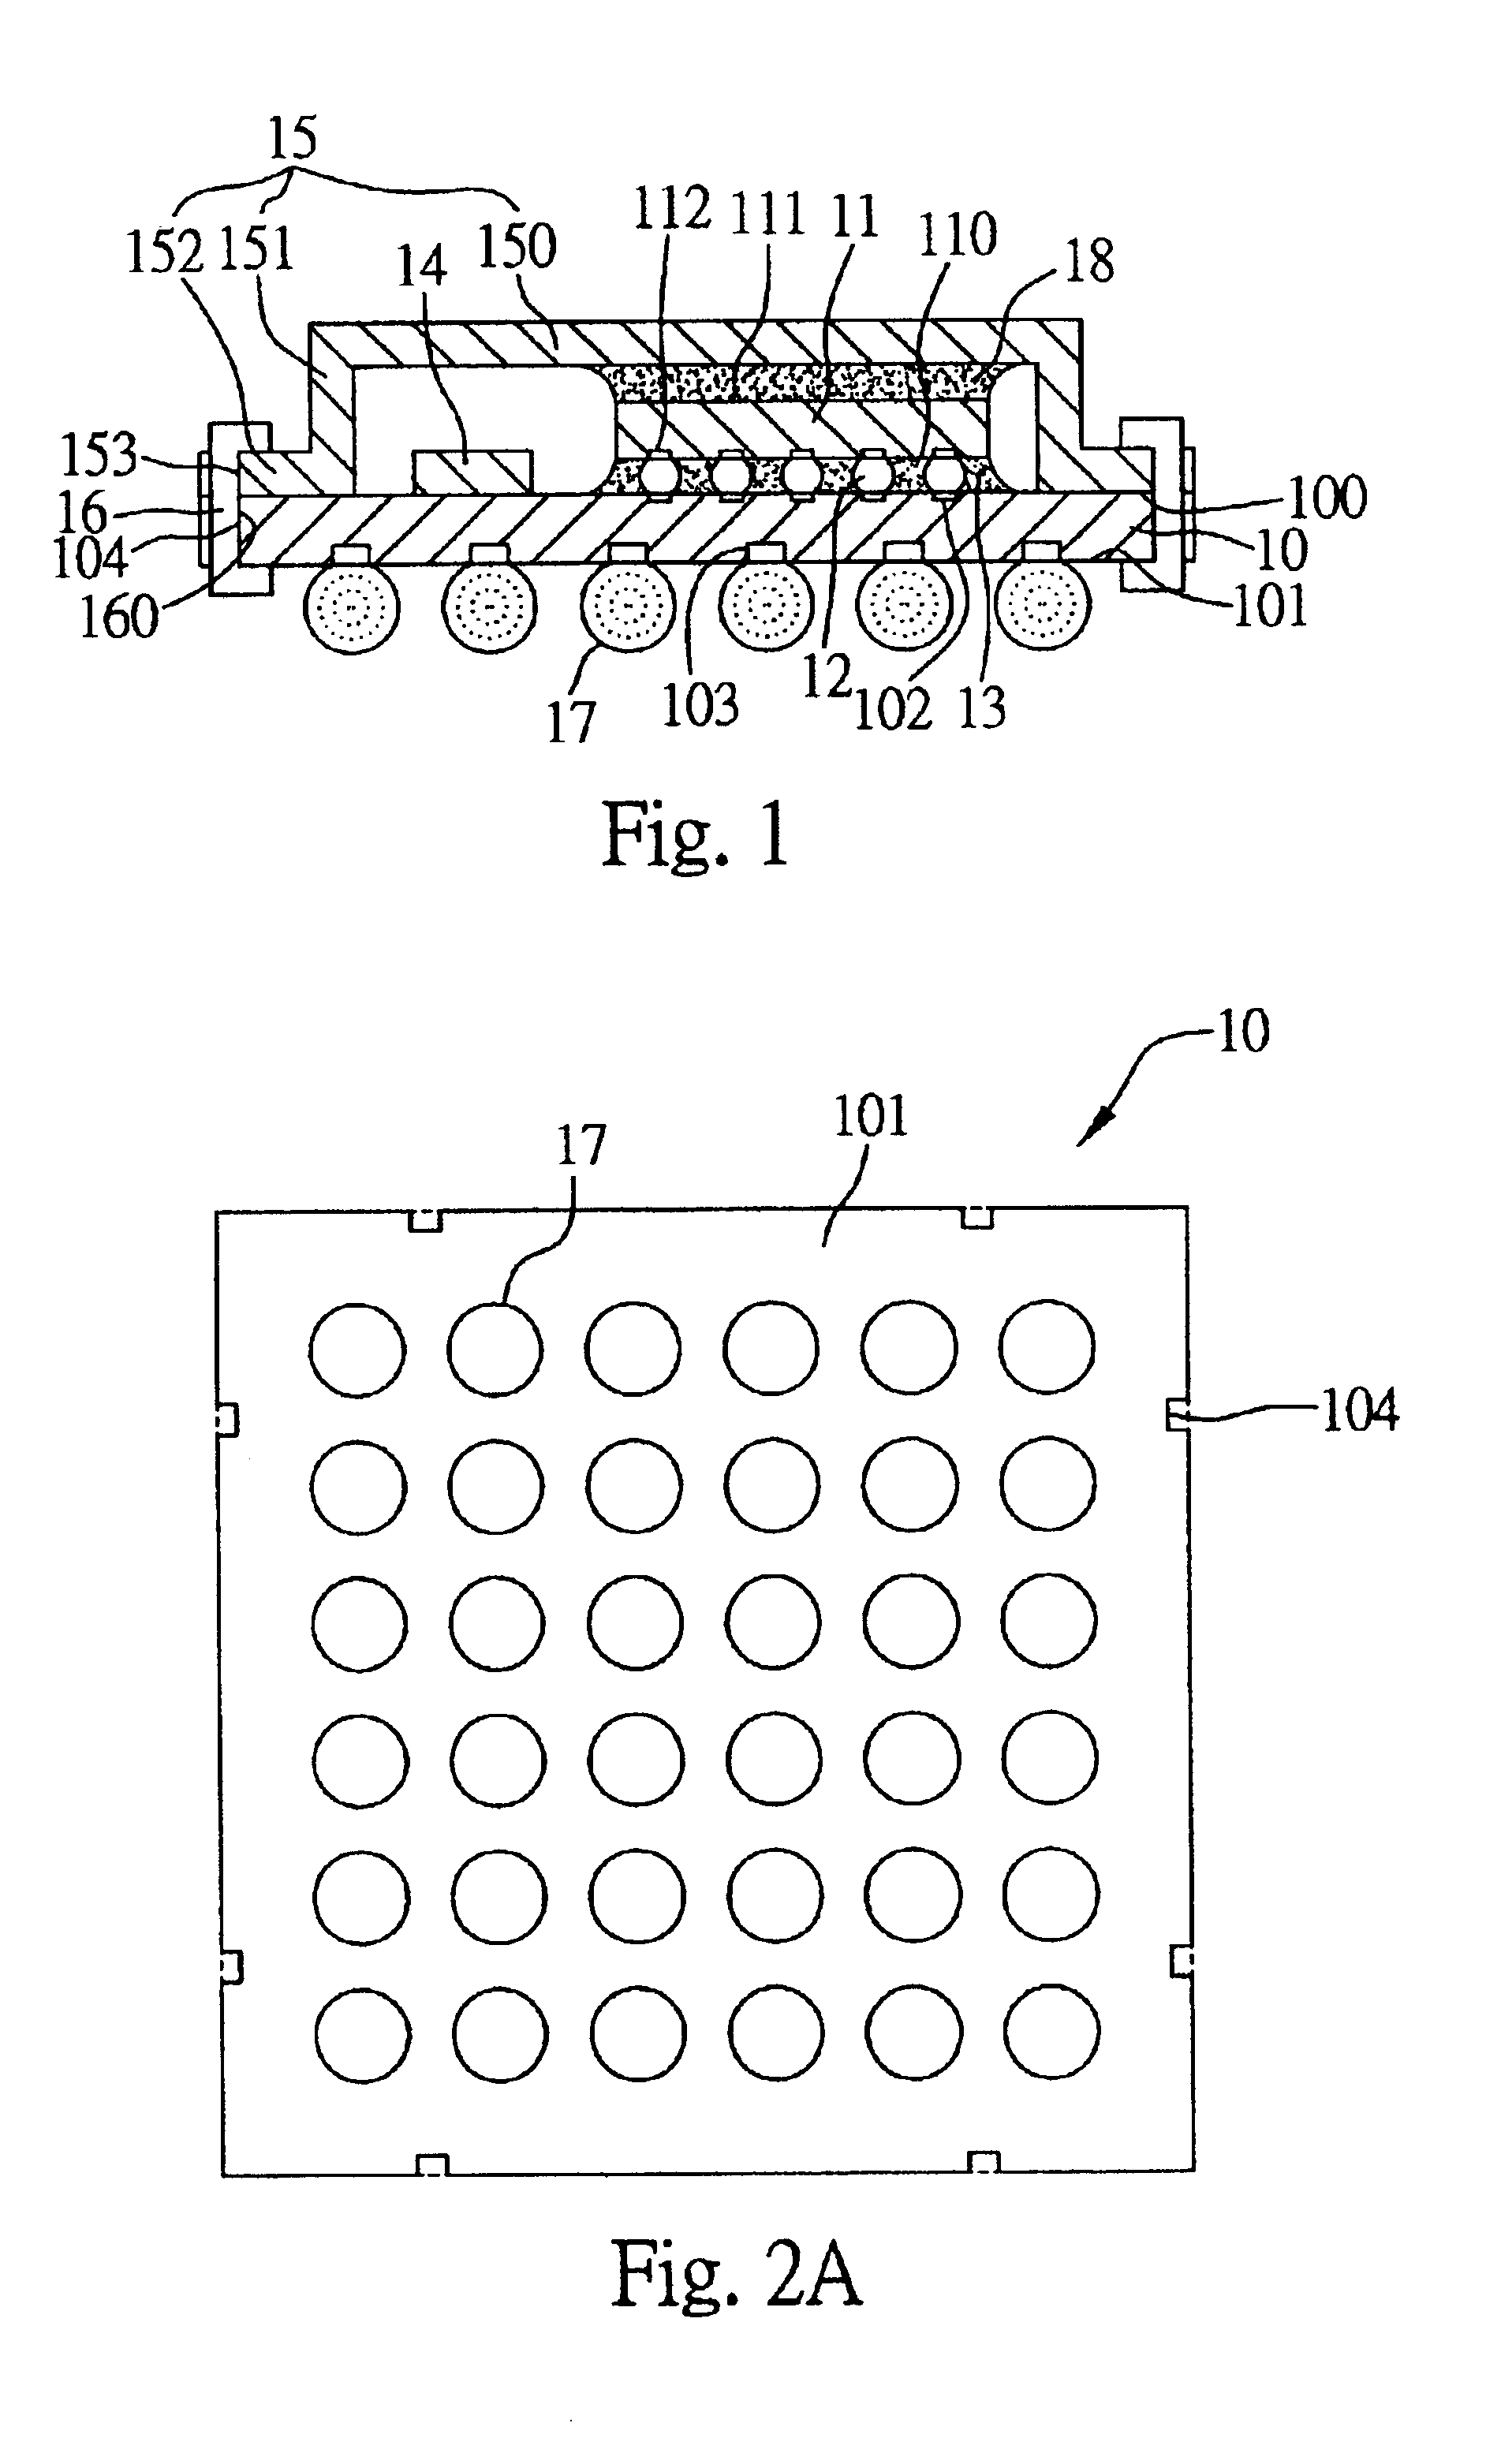 Semiconductor package with heat sink attached to substrate